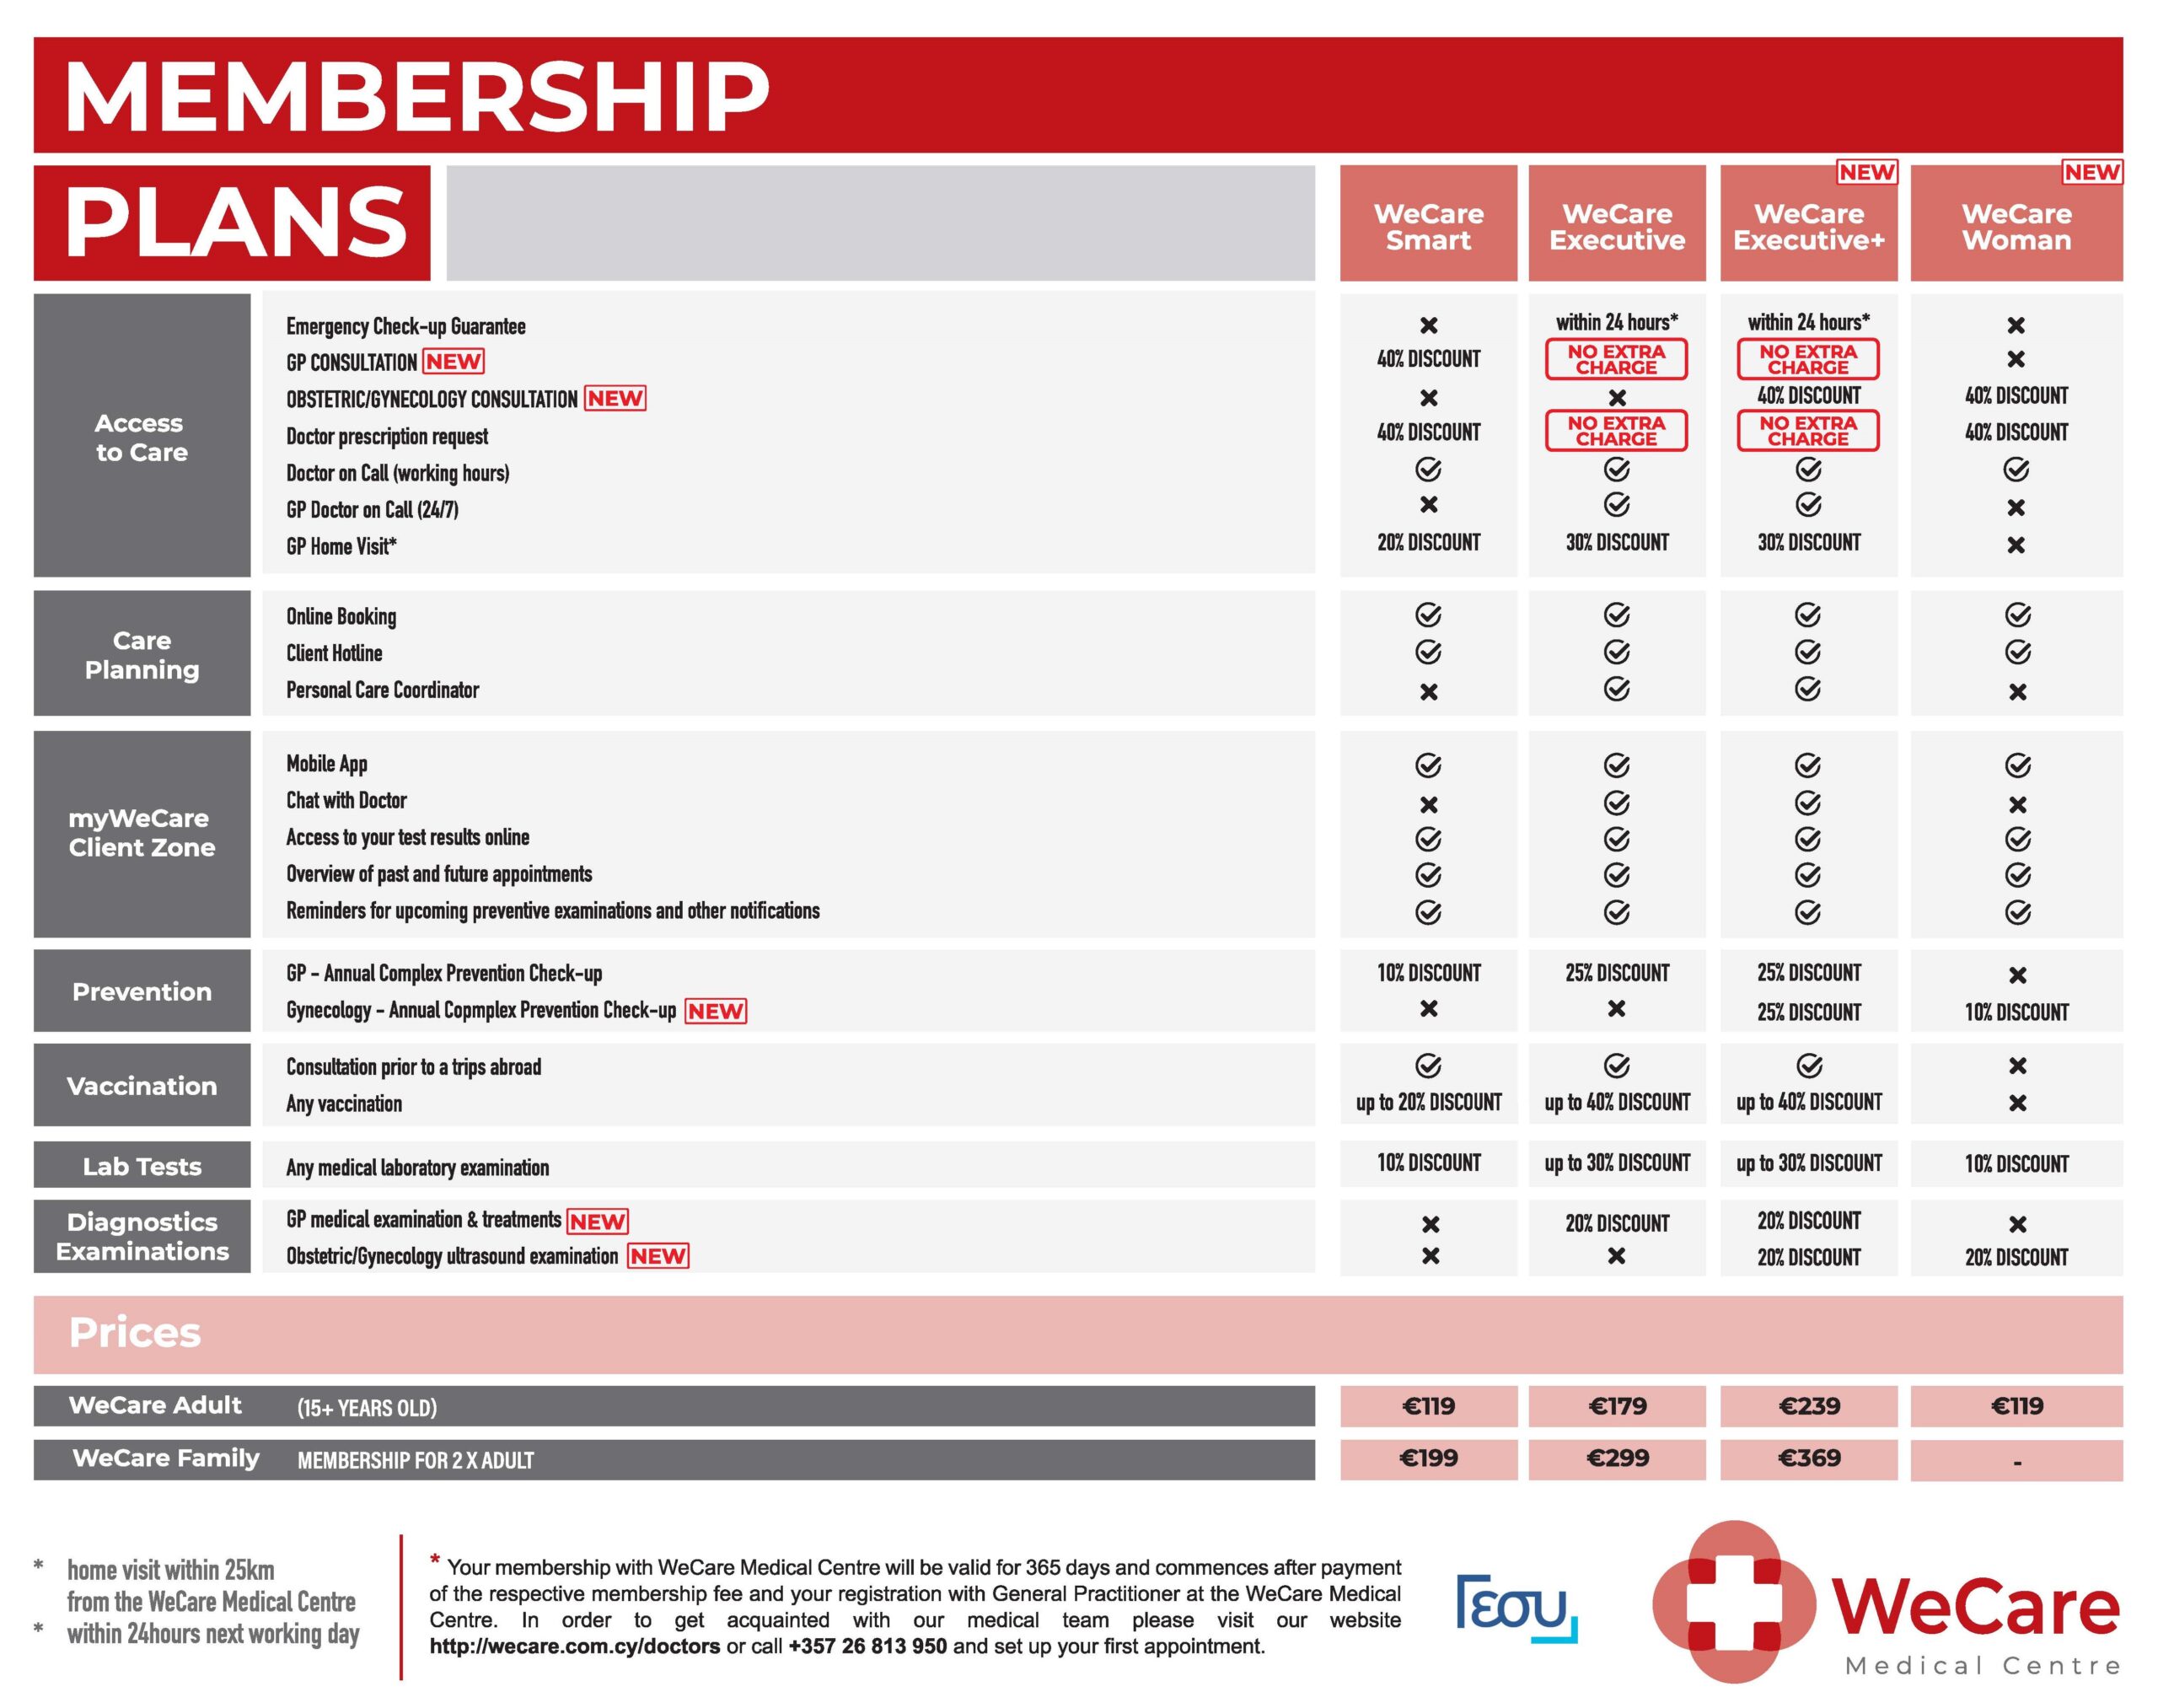 Image of medical membership plan details by WeCare Medical Centre, Paphos, Cyprus.